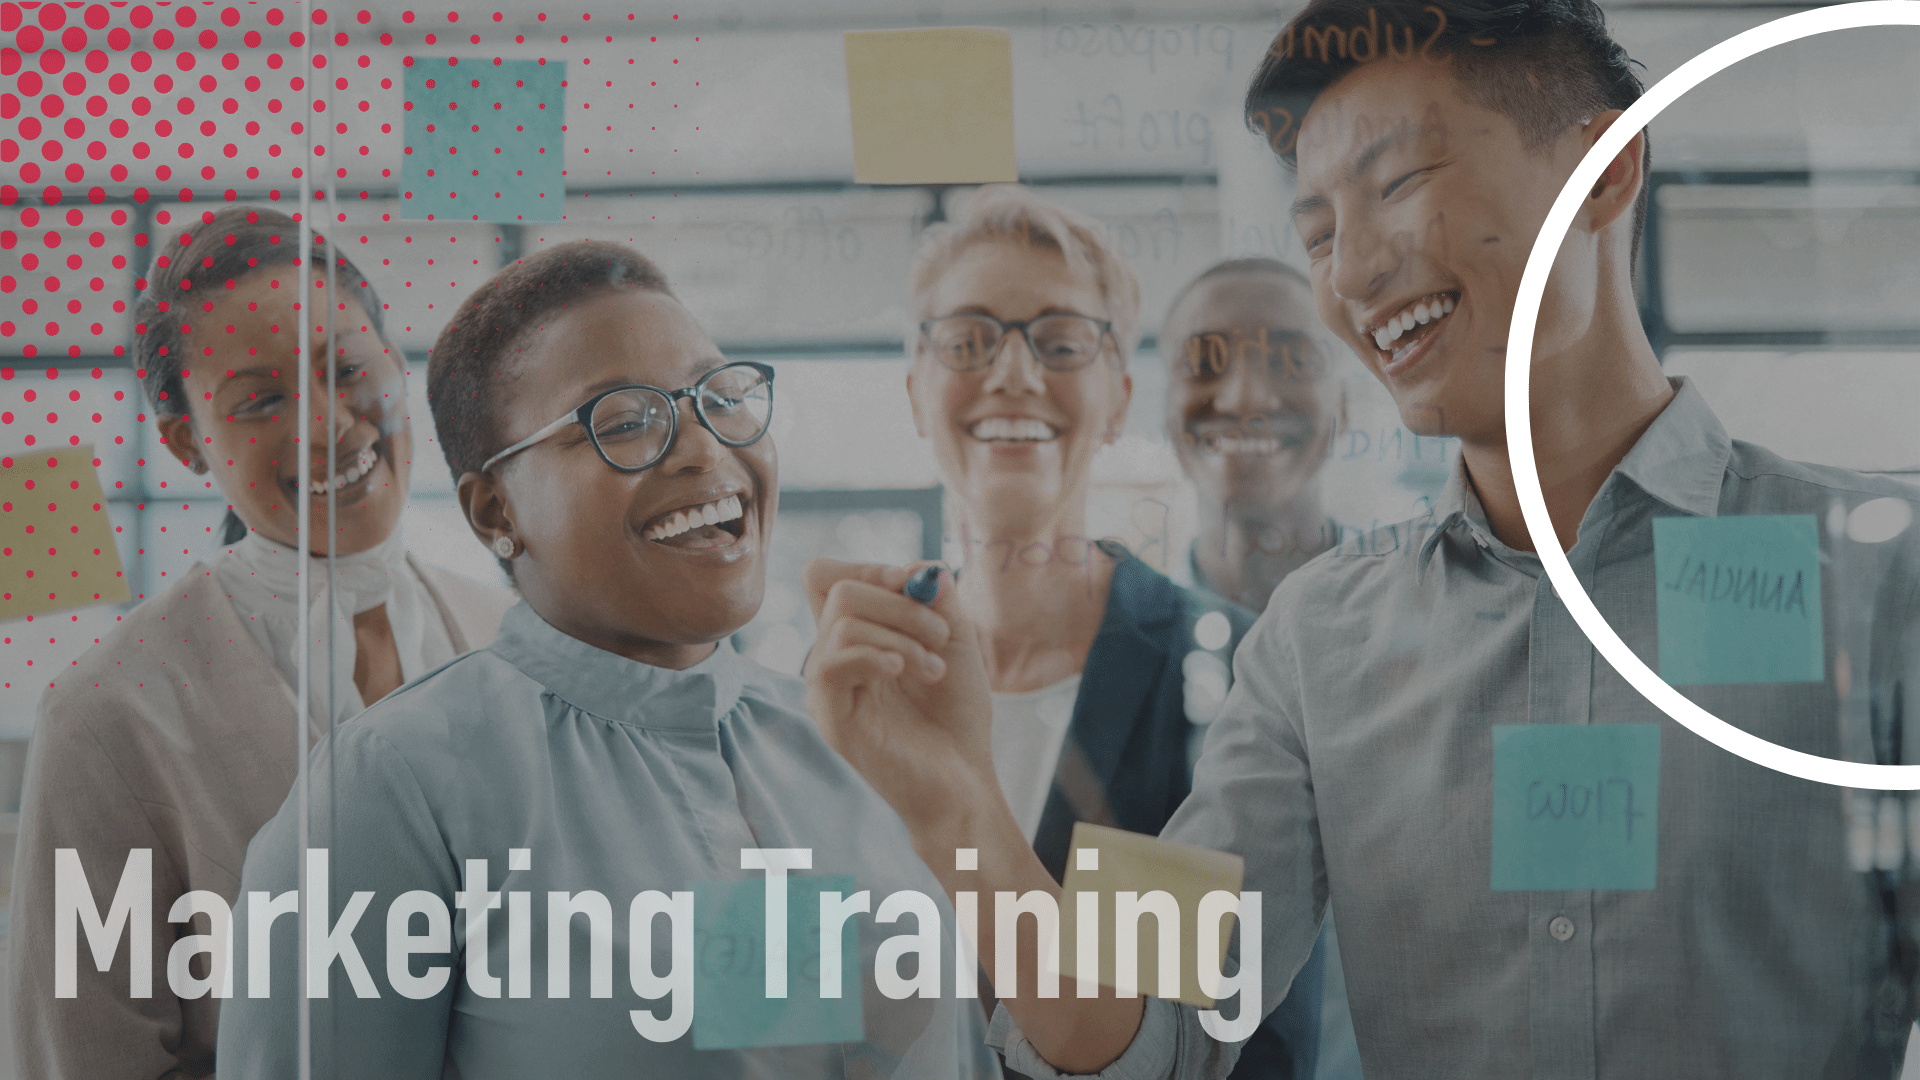 Marketing training program is designed to provide participants with a well-rounded education in marketing.